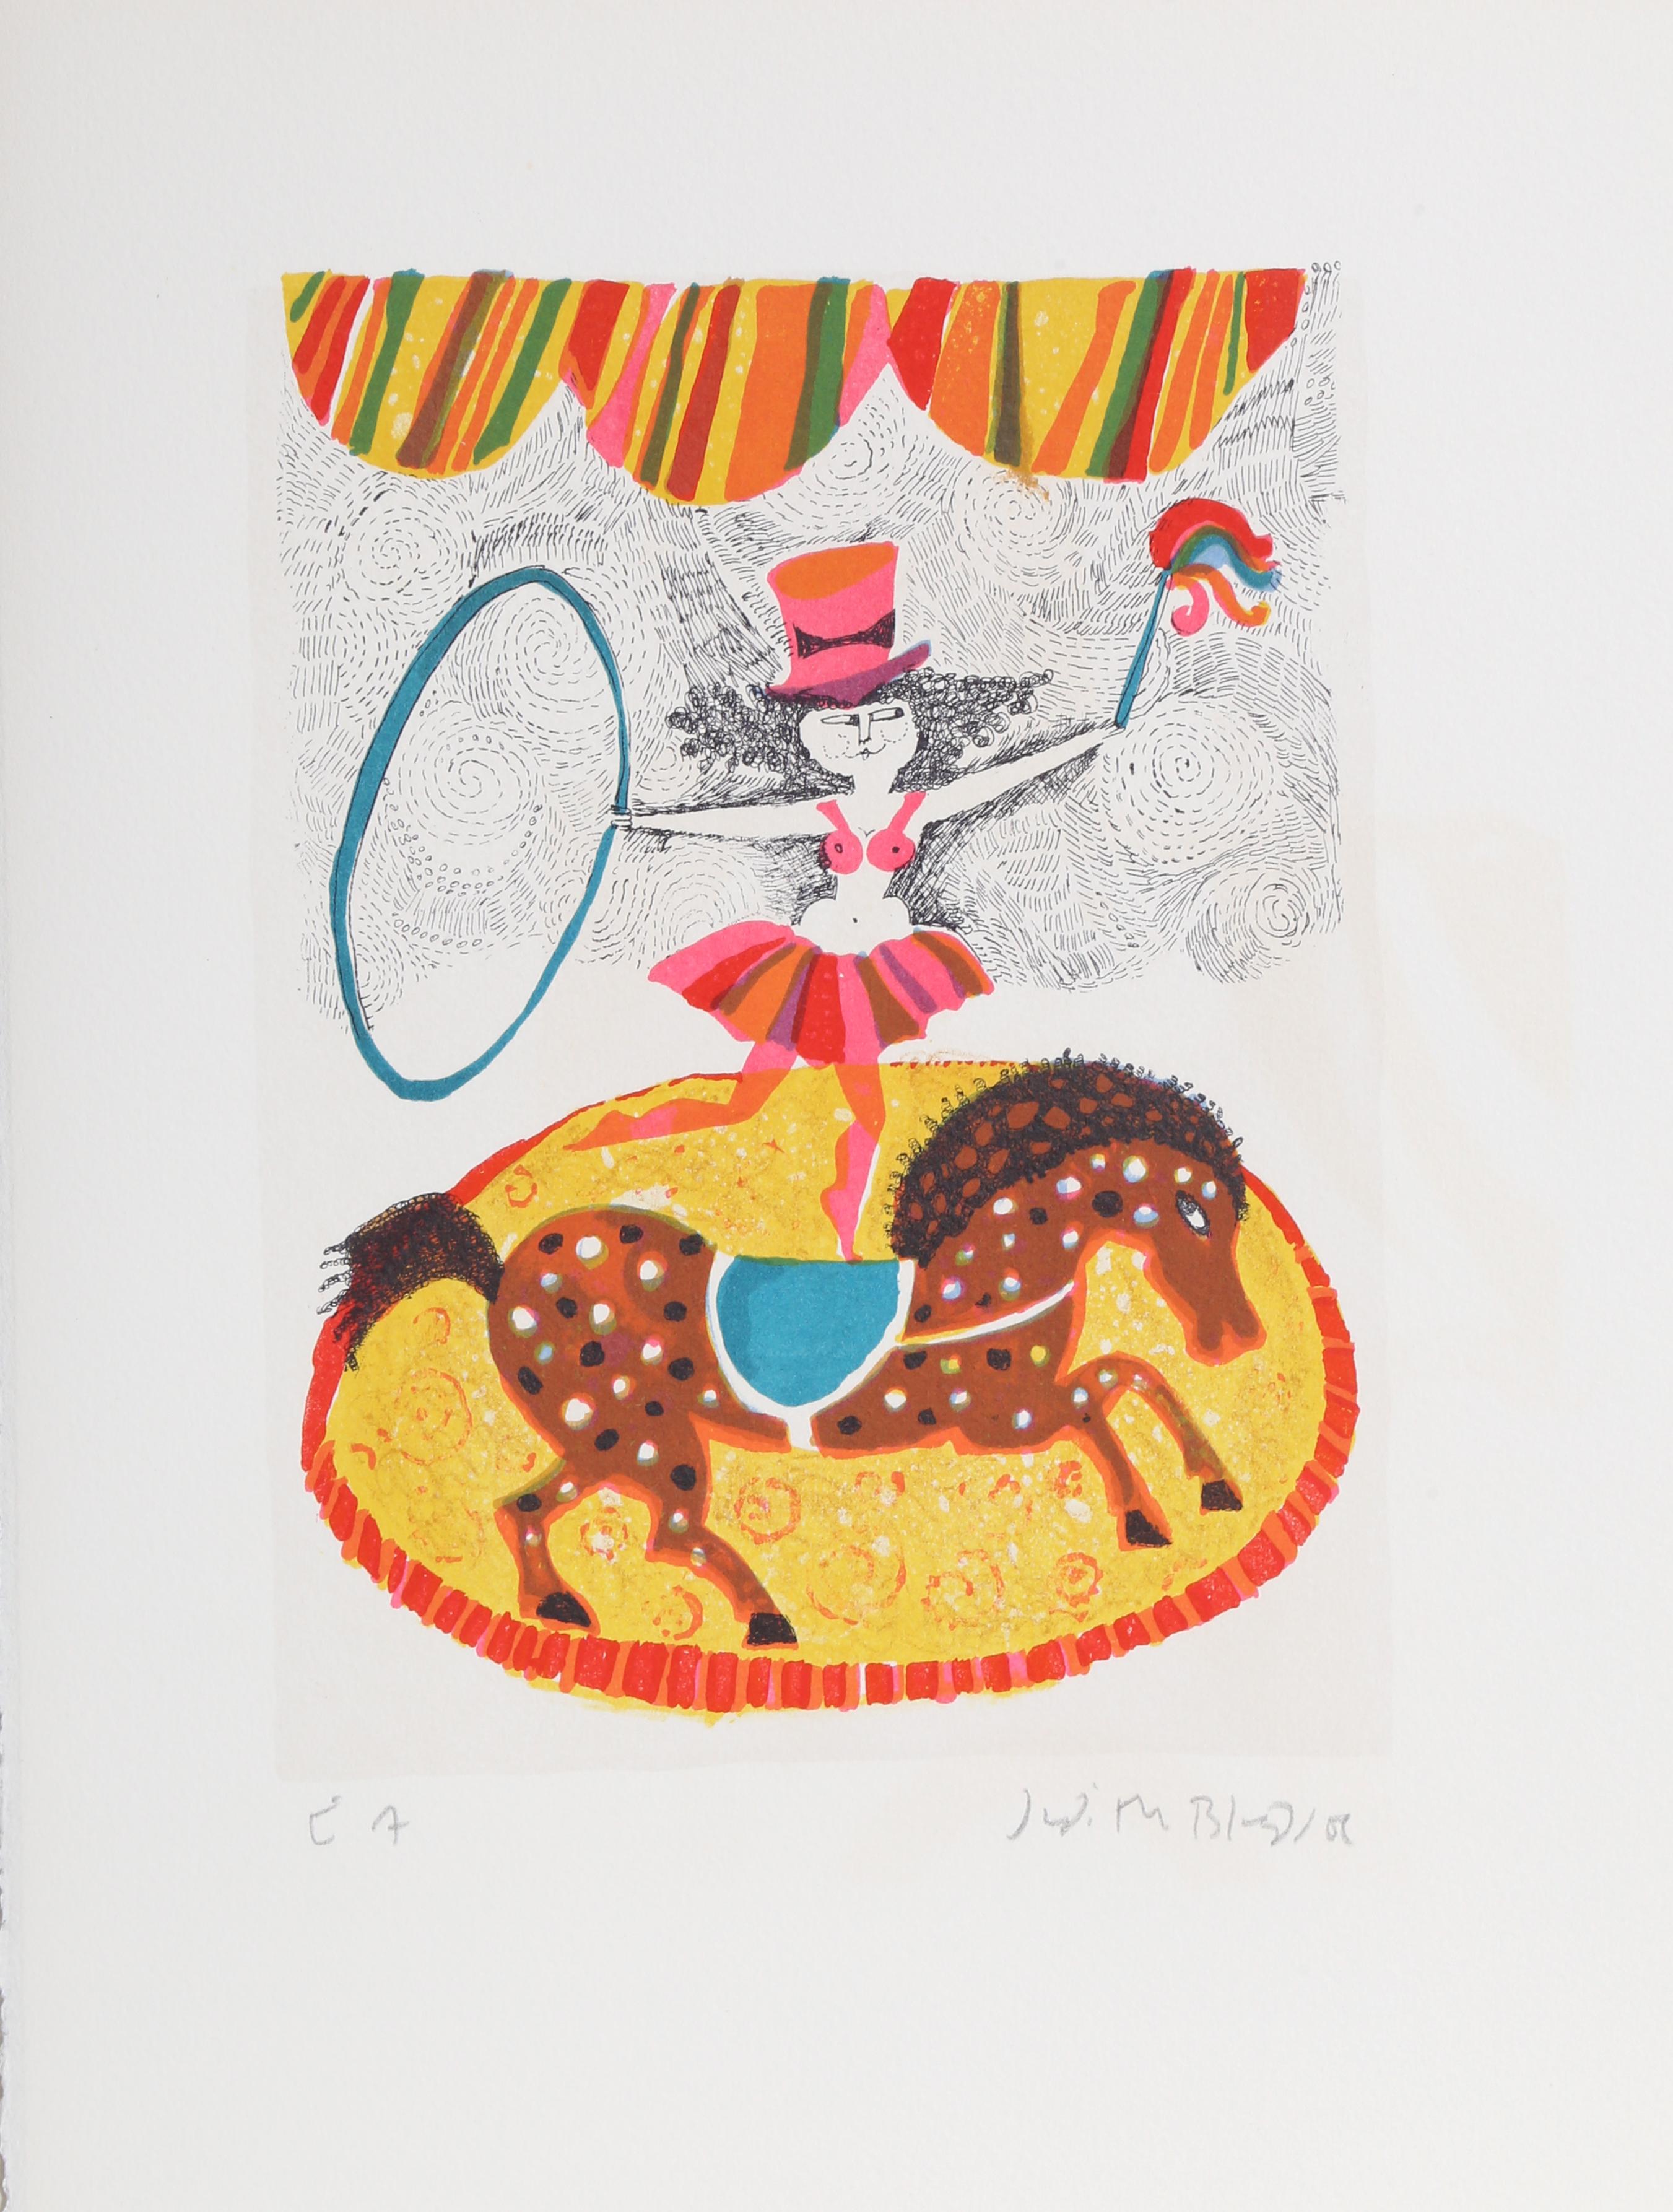 Judith Bledsoe, American (1938 - 2013) -  Horse Acrobat from A Little Circus. Year: 1974, Medium: Lithograph, signed in pencil, Edition: HC, Size: 15  x 10.5 in. (38.1  x 26.67 cm), Description: Balancing on the saddle of a horse, the acrobat shown